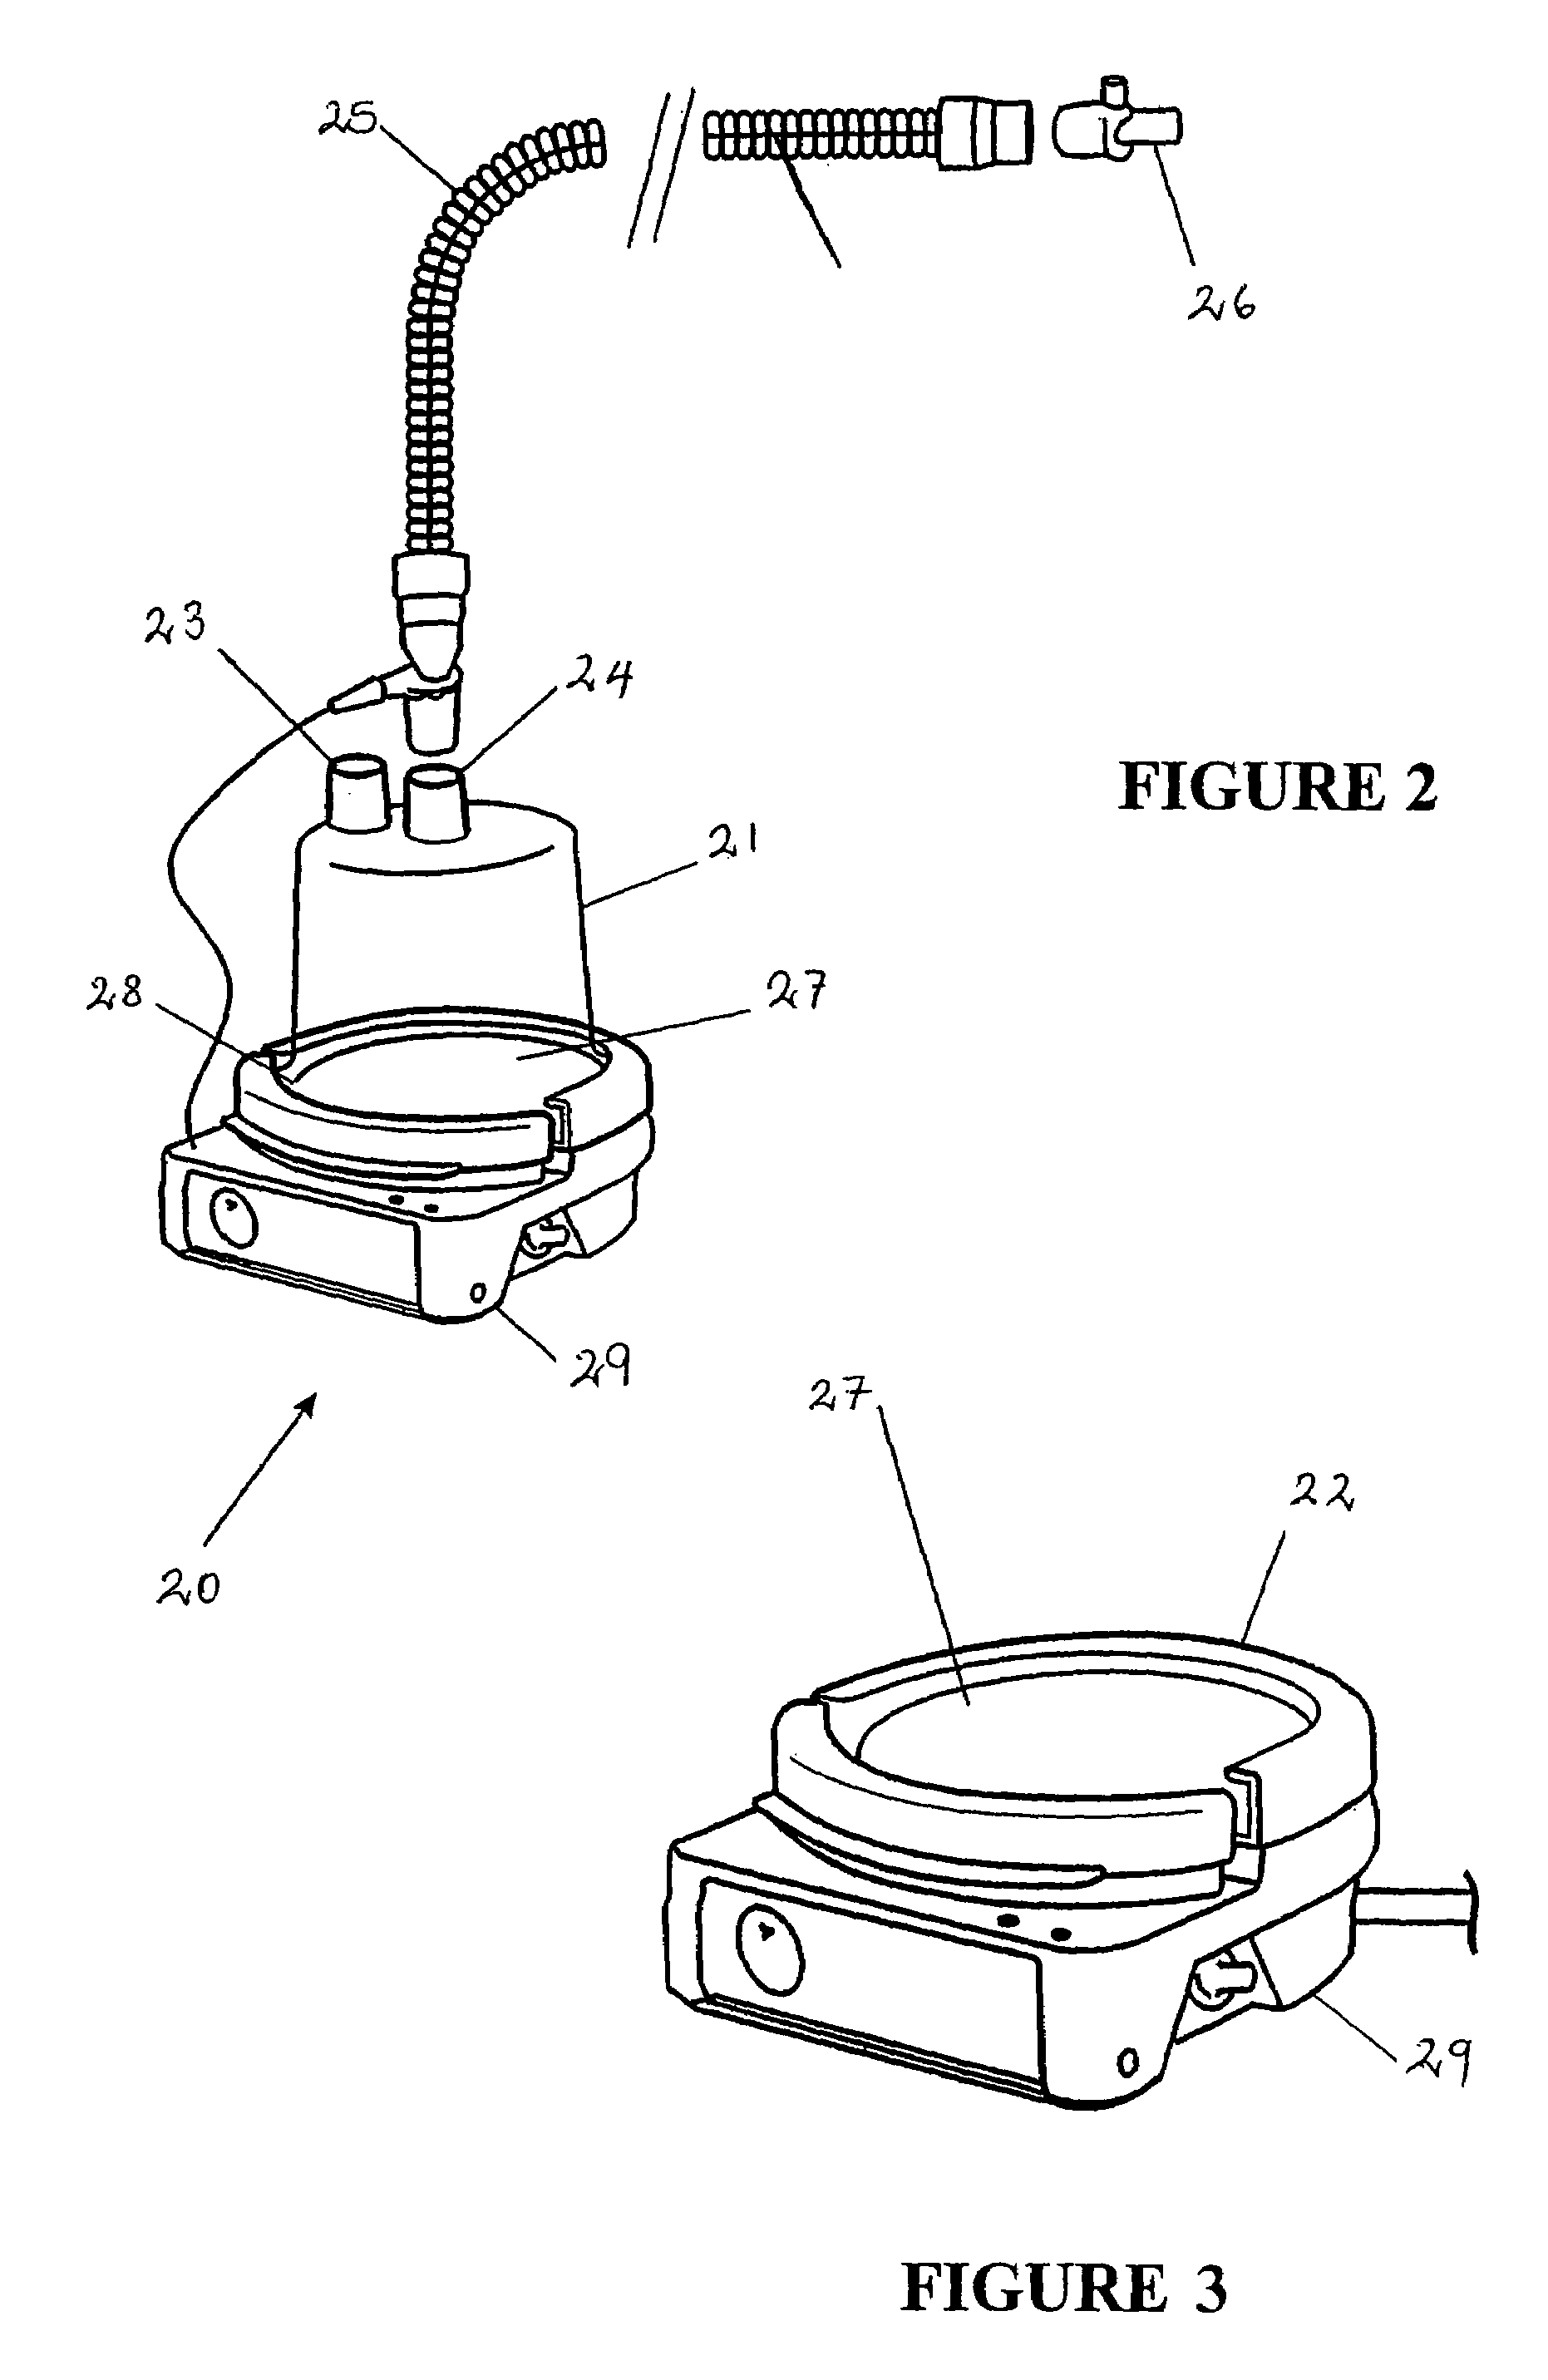 Conduit overheating detection system